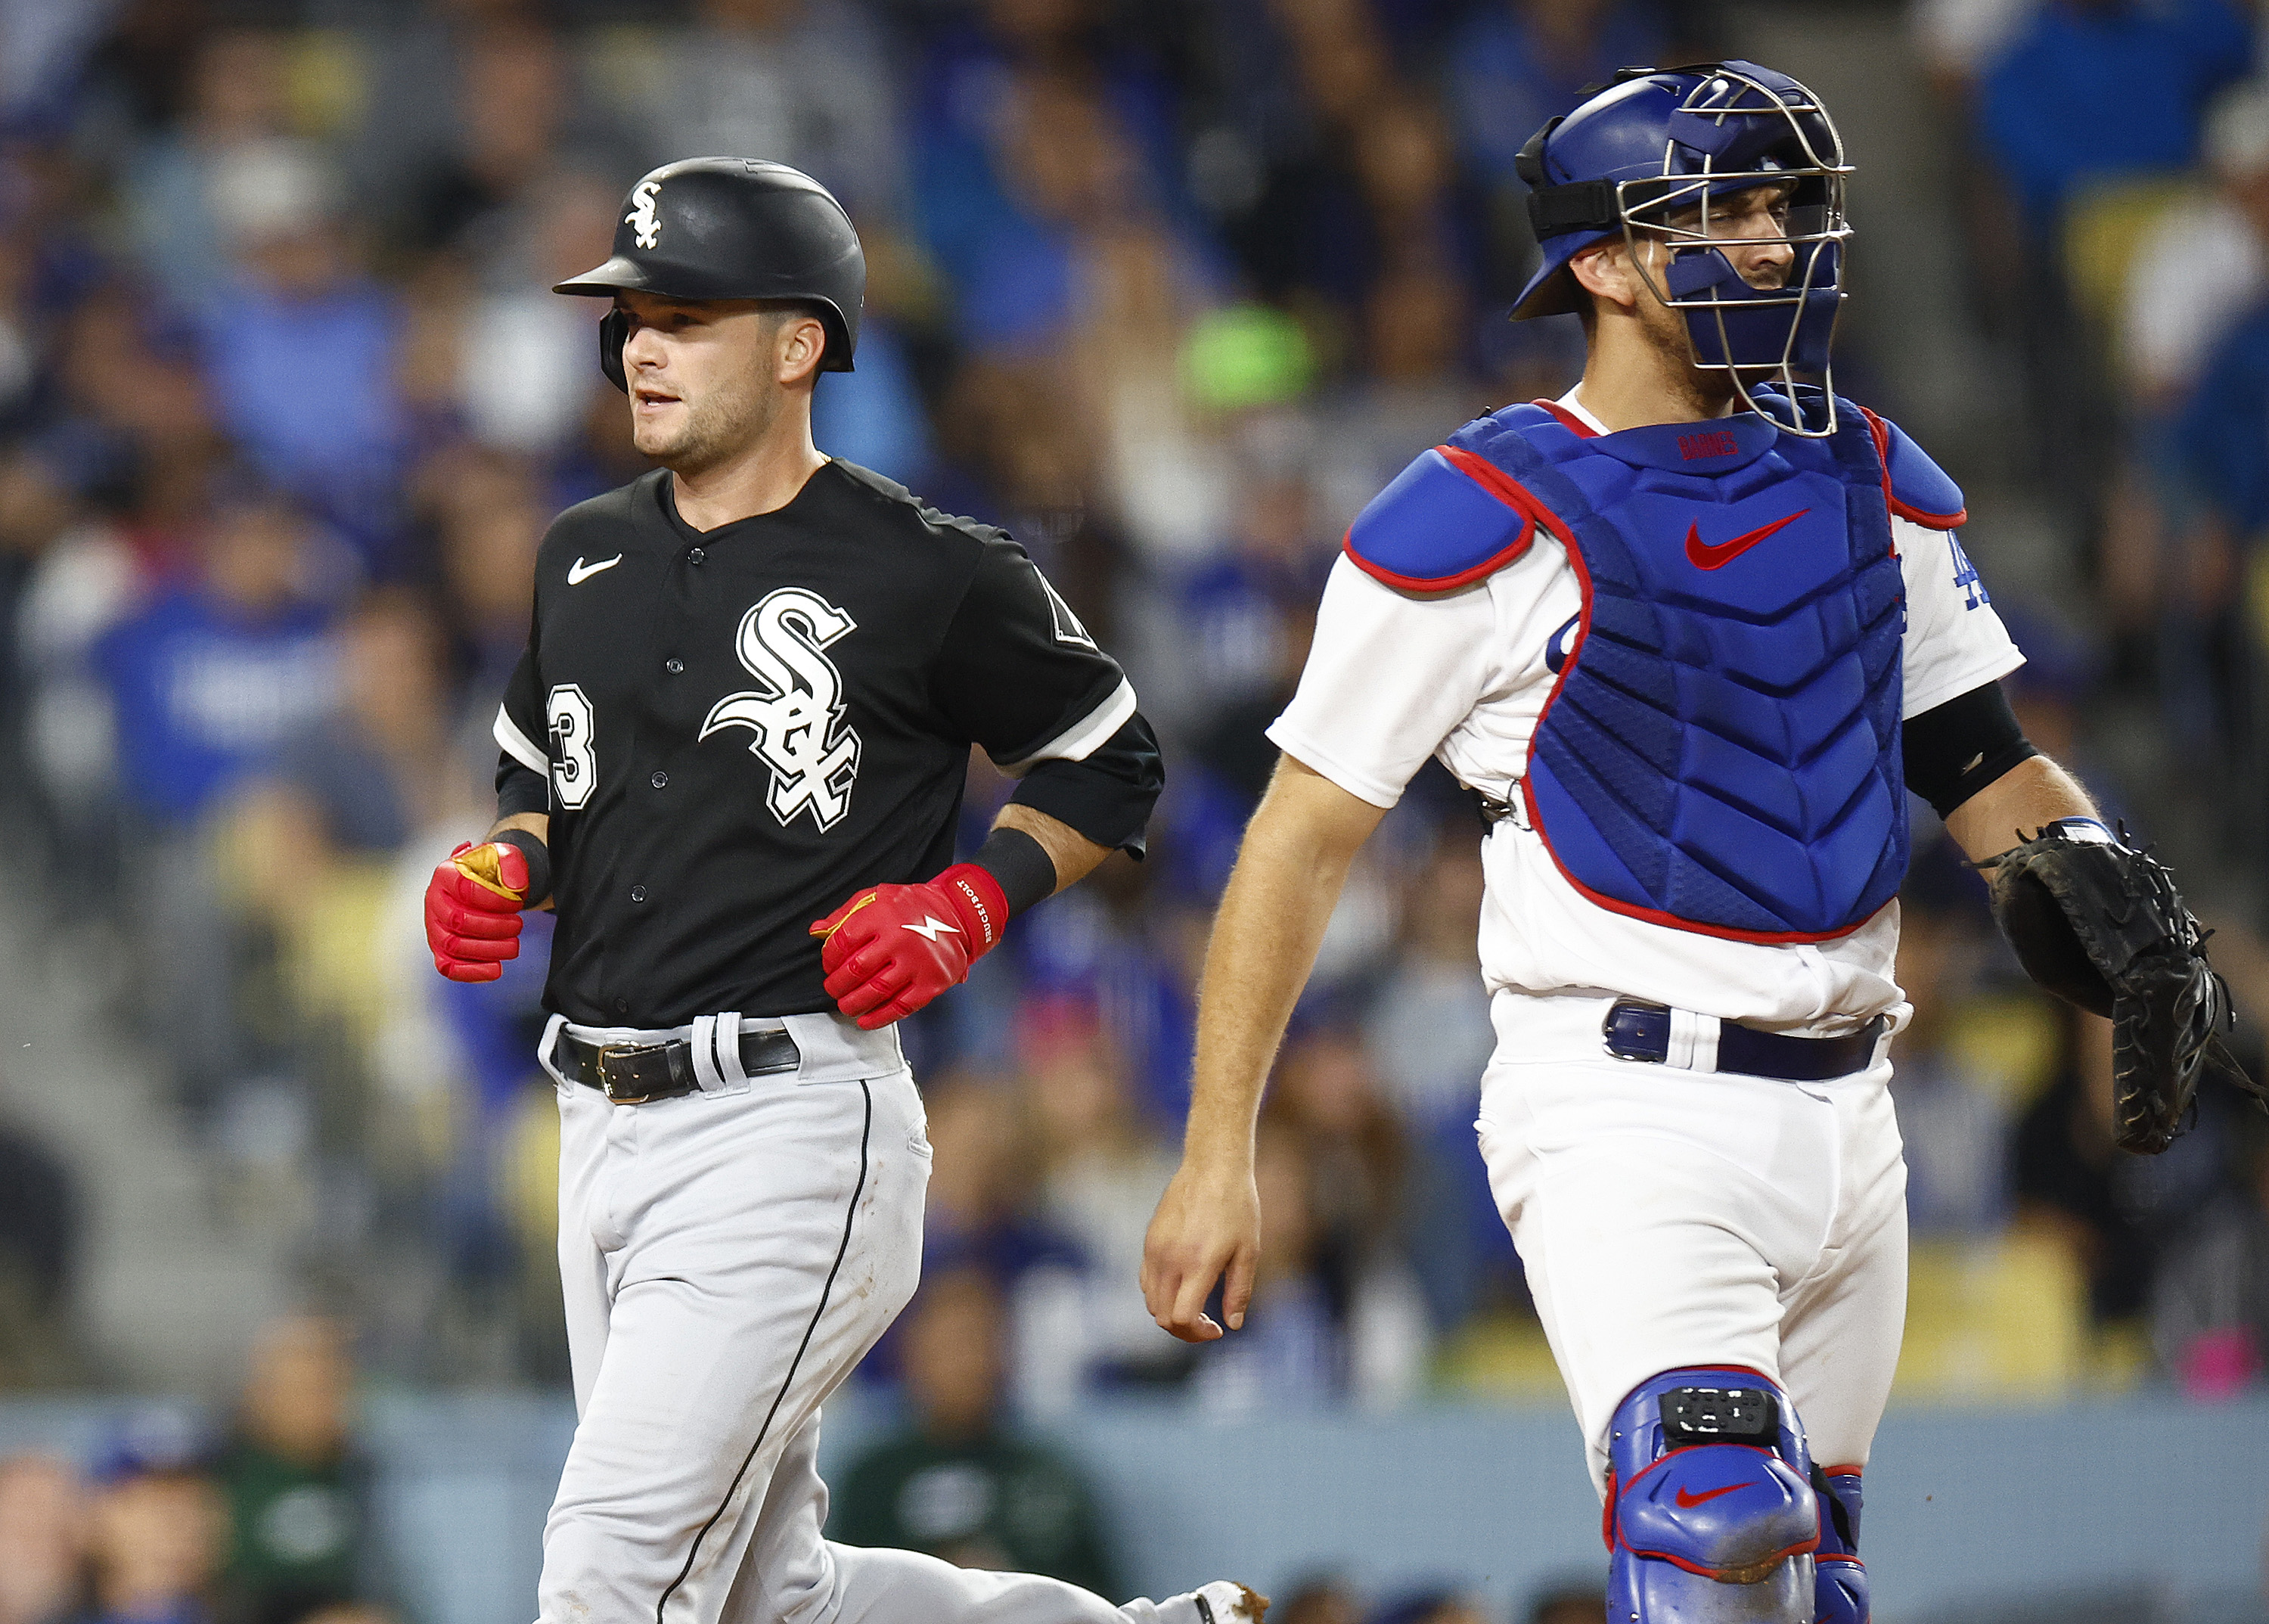 Yankees: OF targets after losing Andrew Benintendi to White Sox